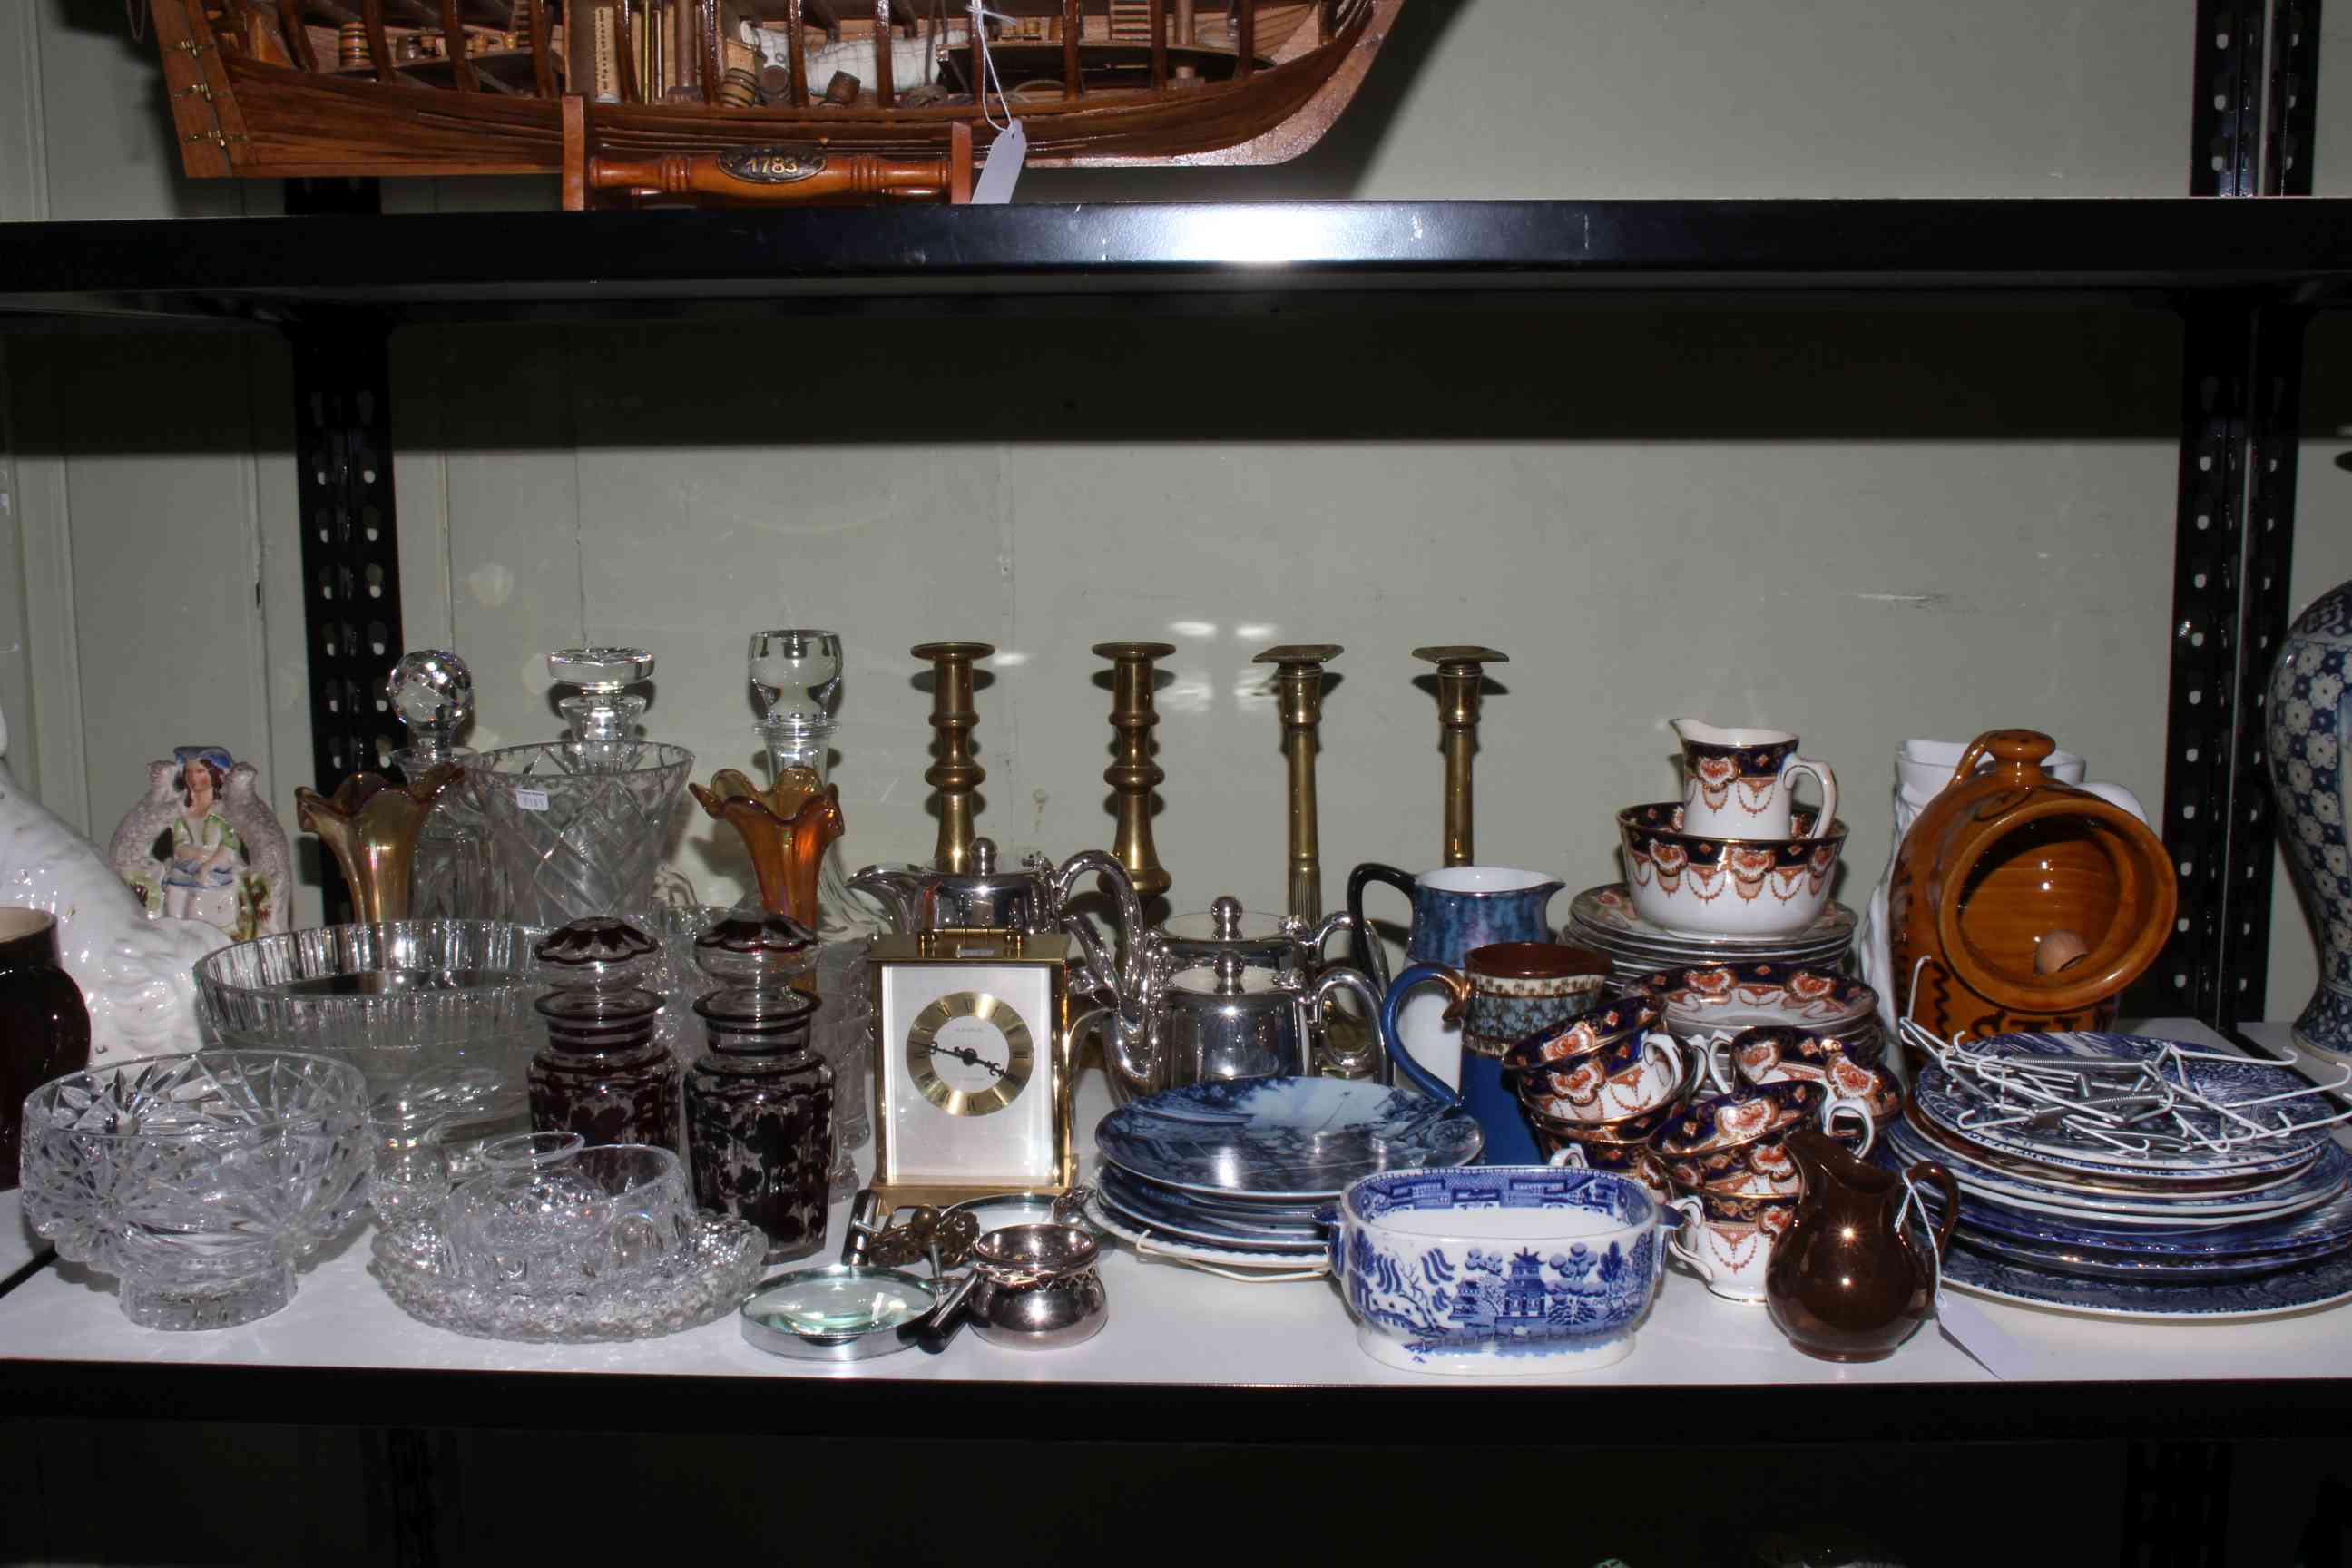 Collection of Victorian china, glass, metalwares, blue and white plates, carriage clock, etc.